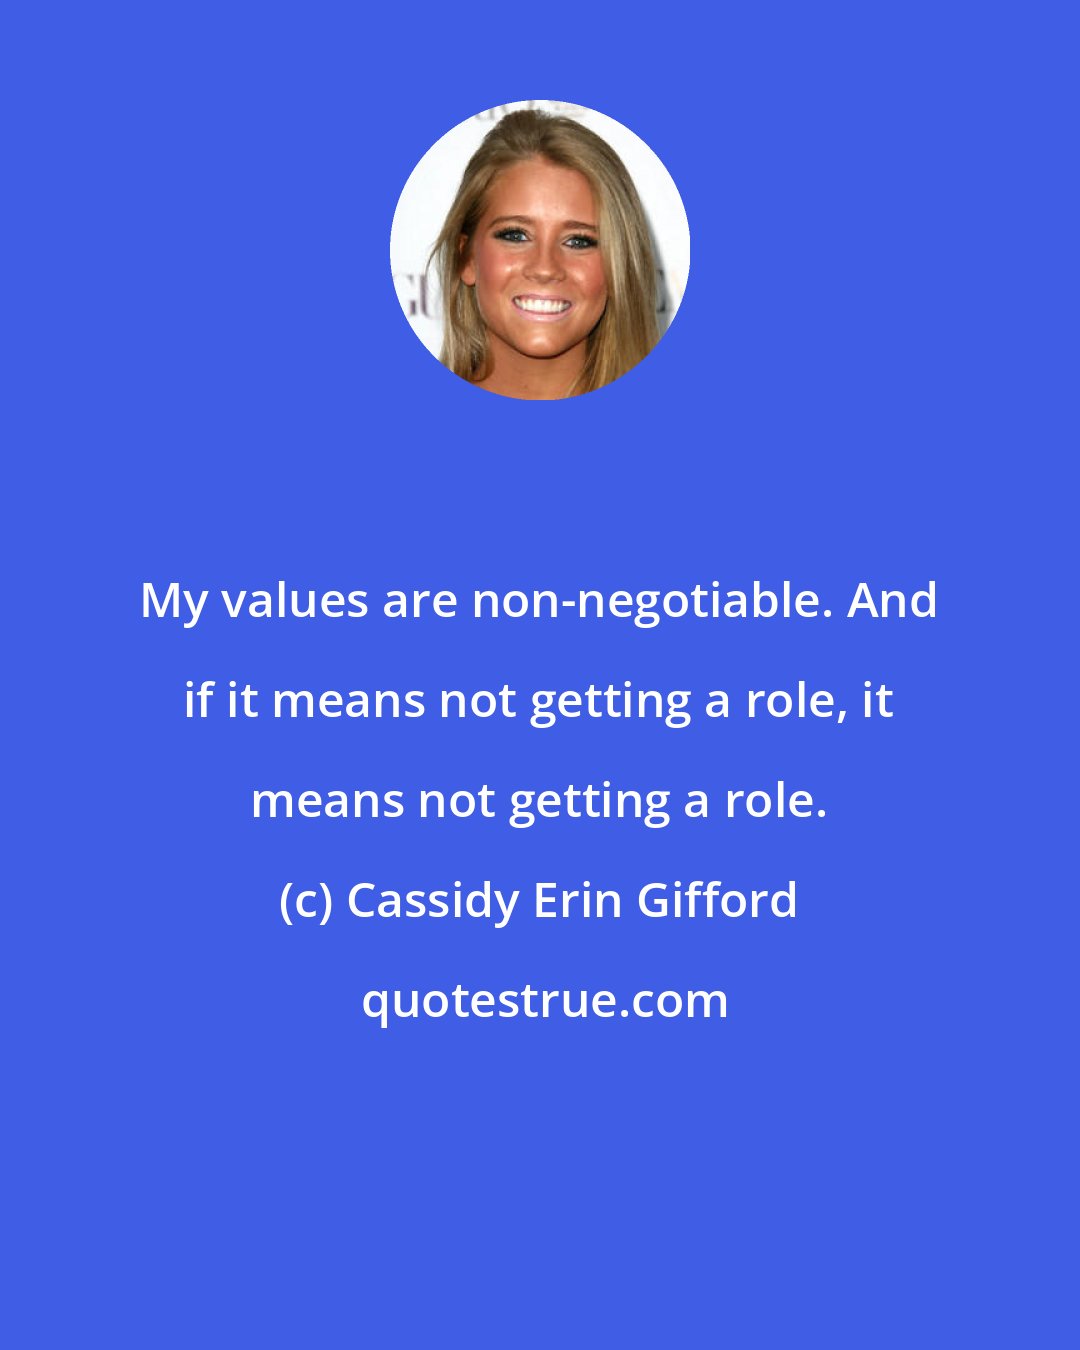 Cassidy Erin Gifford: My values are non-negotiable. And if it means not getting a role, it means not getting a role.